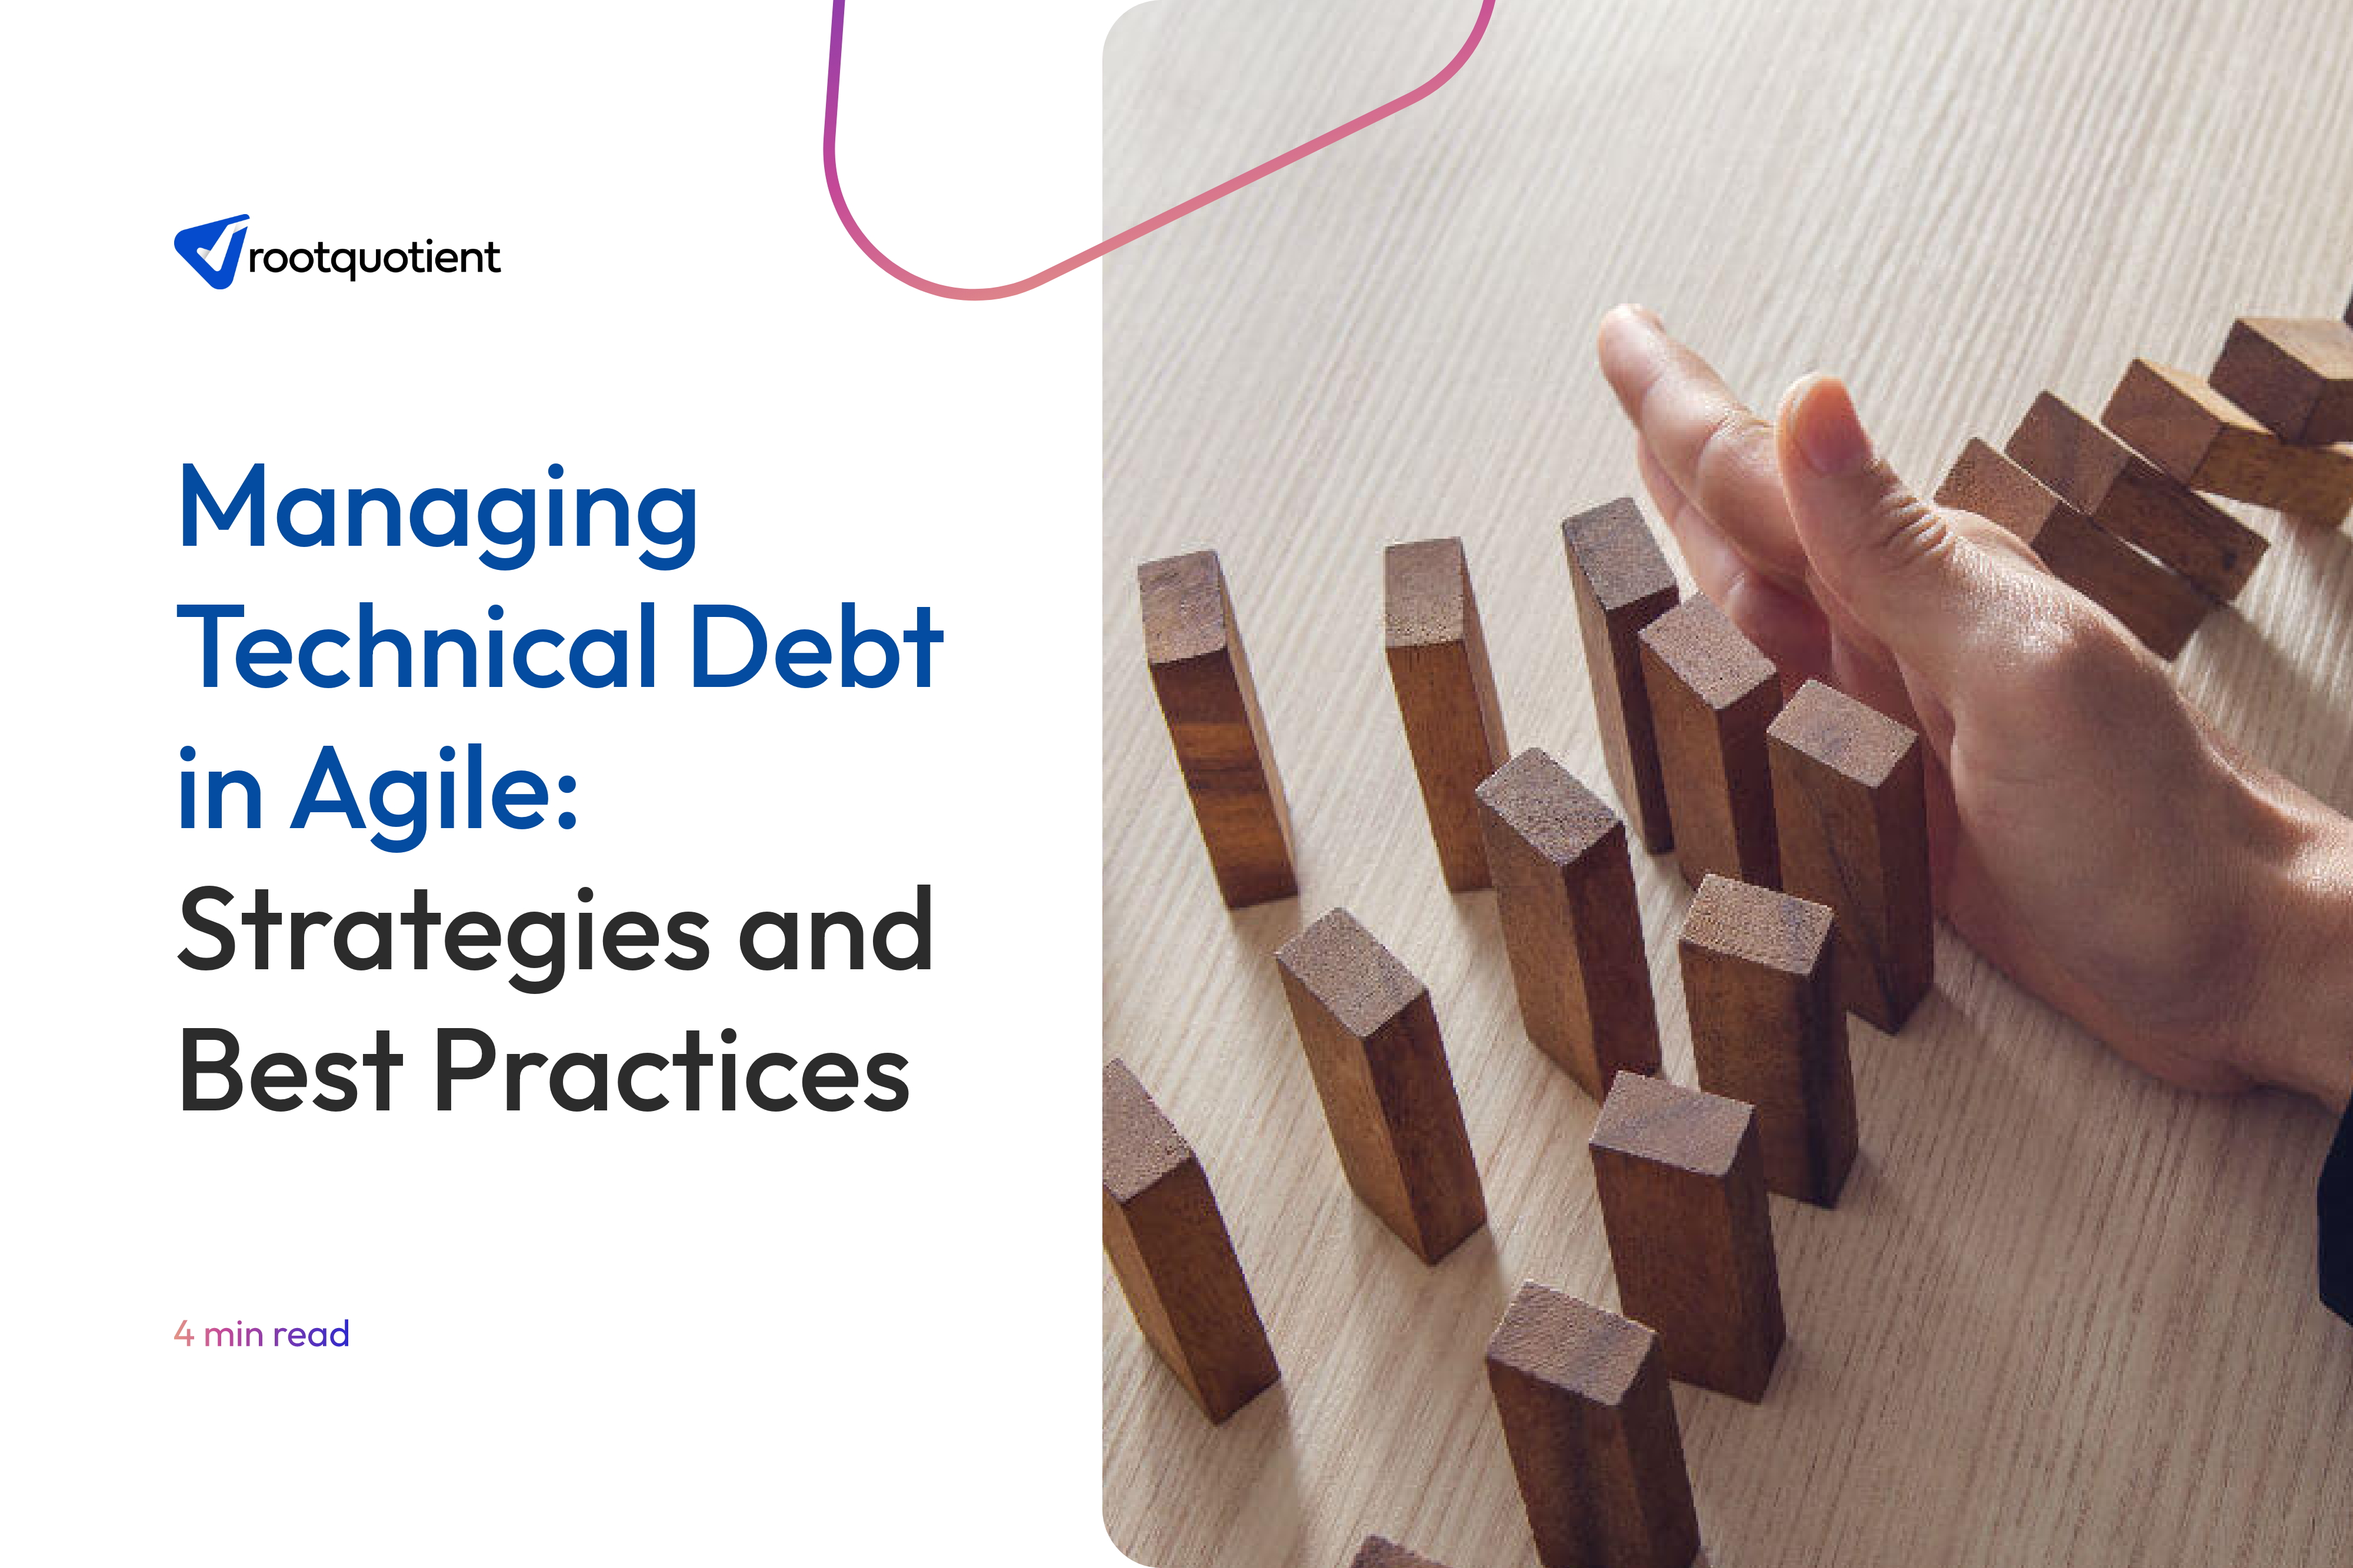 Managing Technical Debt in Agile: Strategies and Best Practices